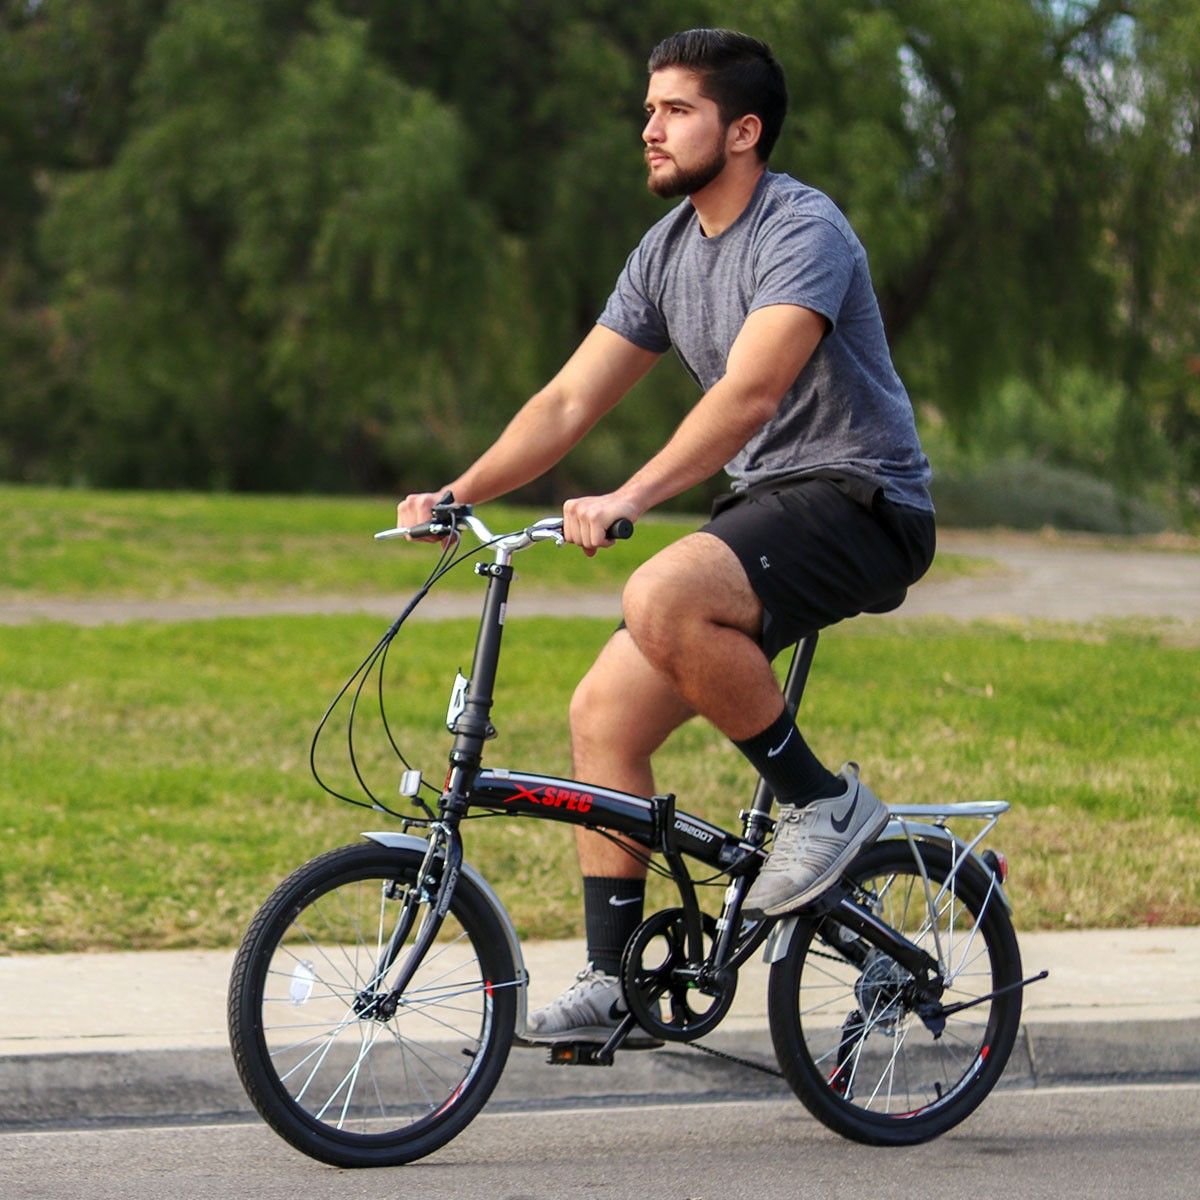 Brand New Adult Folding bike with gears worth $190